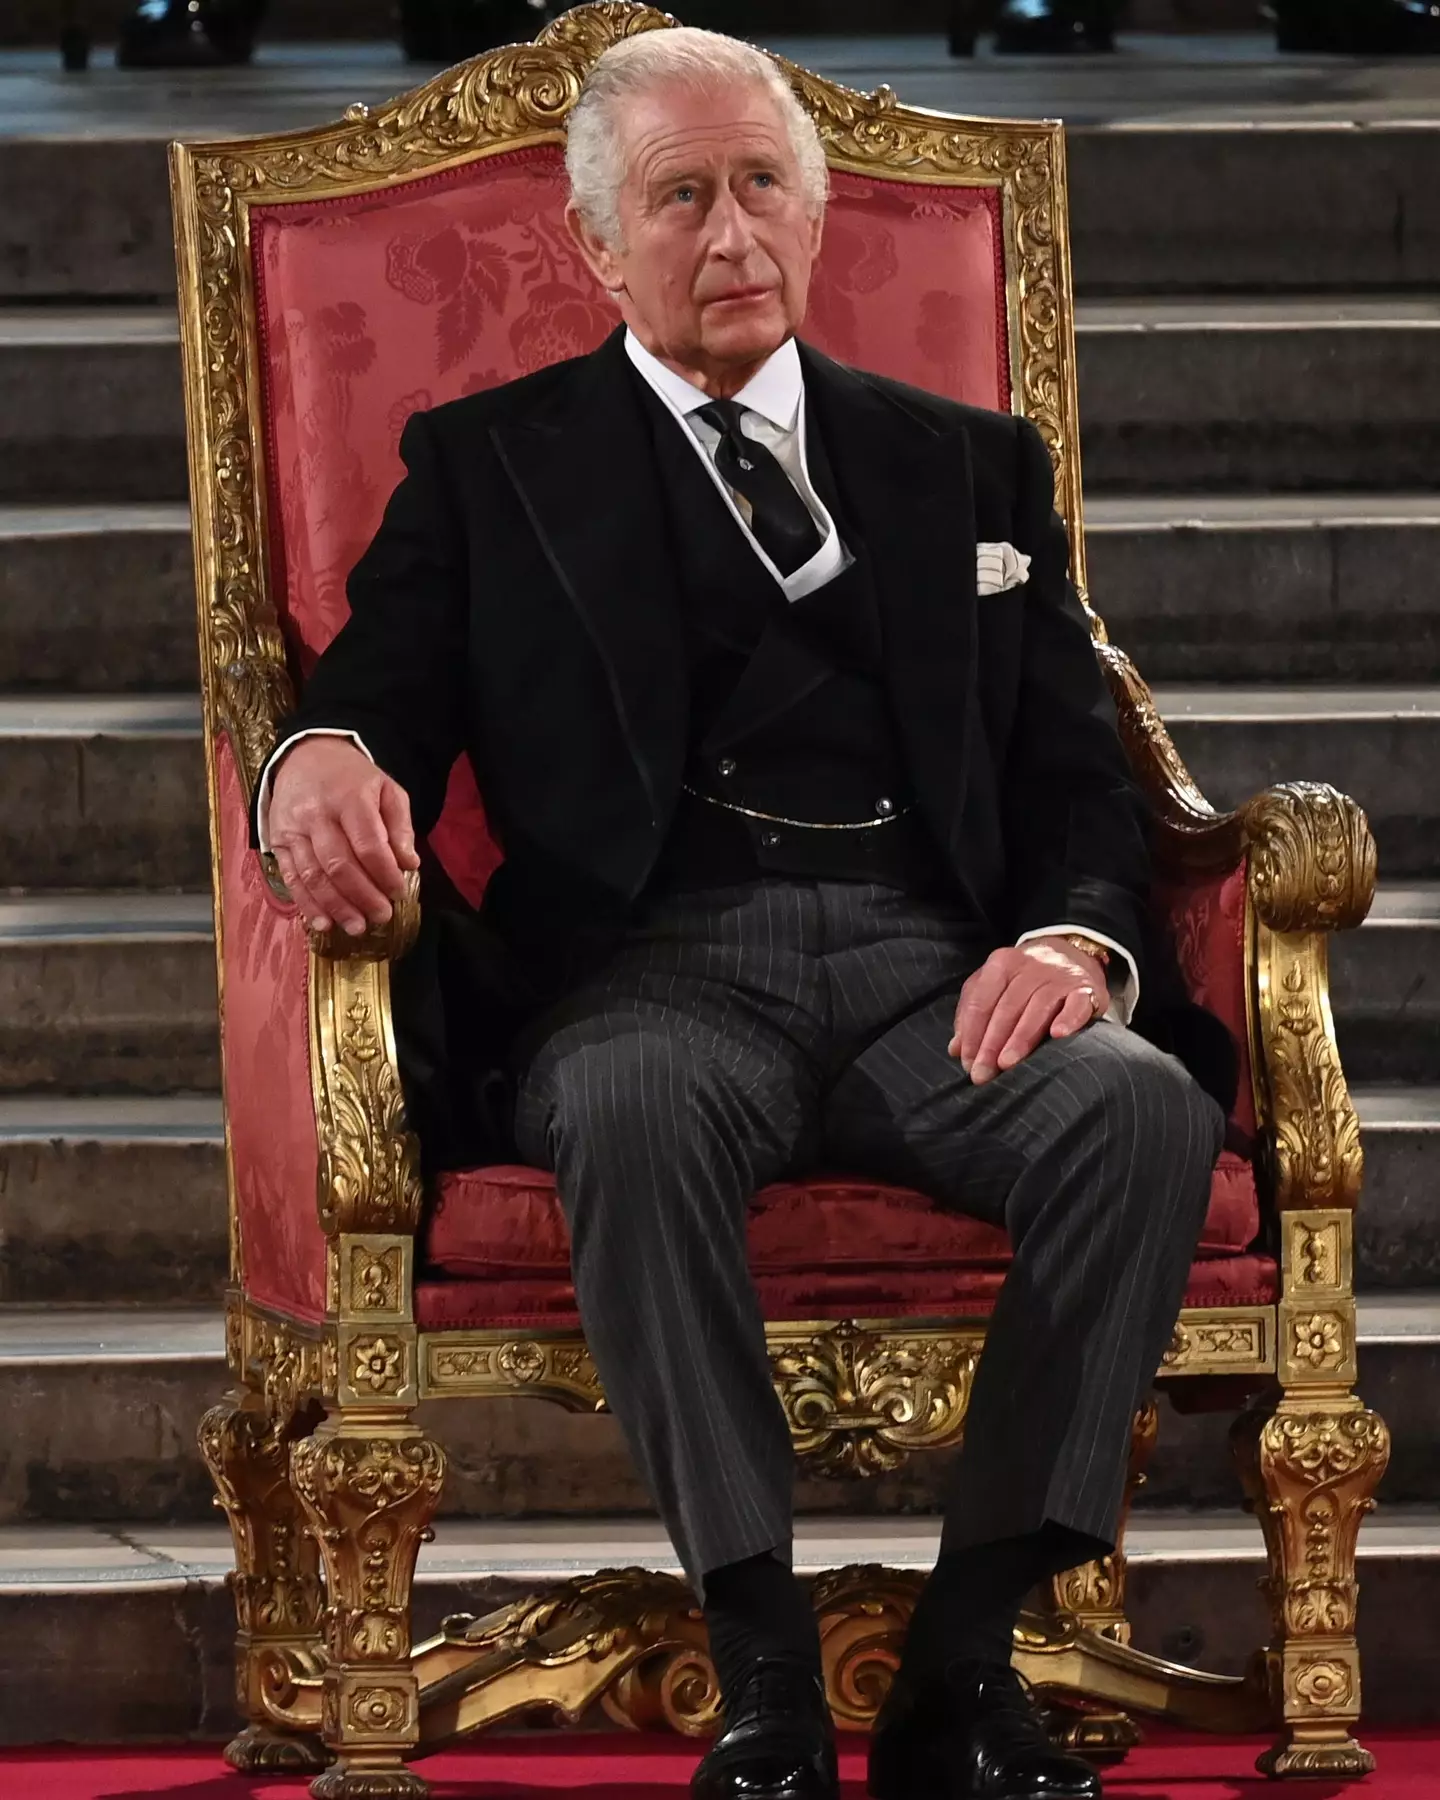 King Charles III will be coronated as King on Saturday in a traditional ceremony at Westminster Abbey.